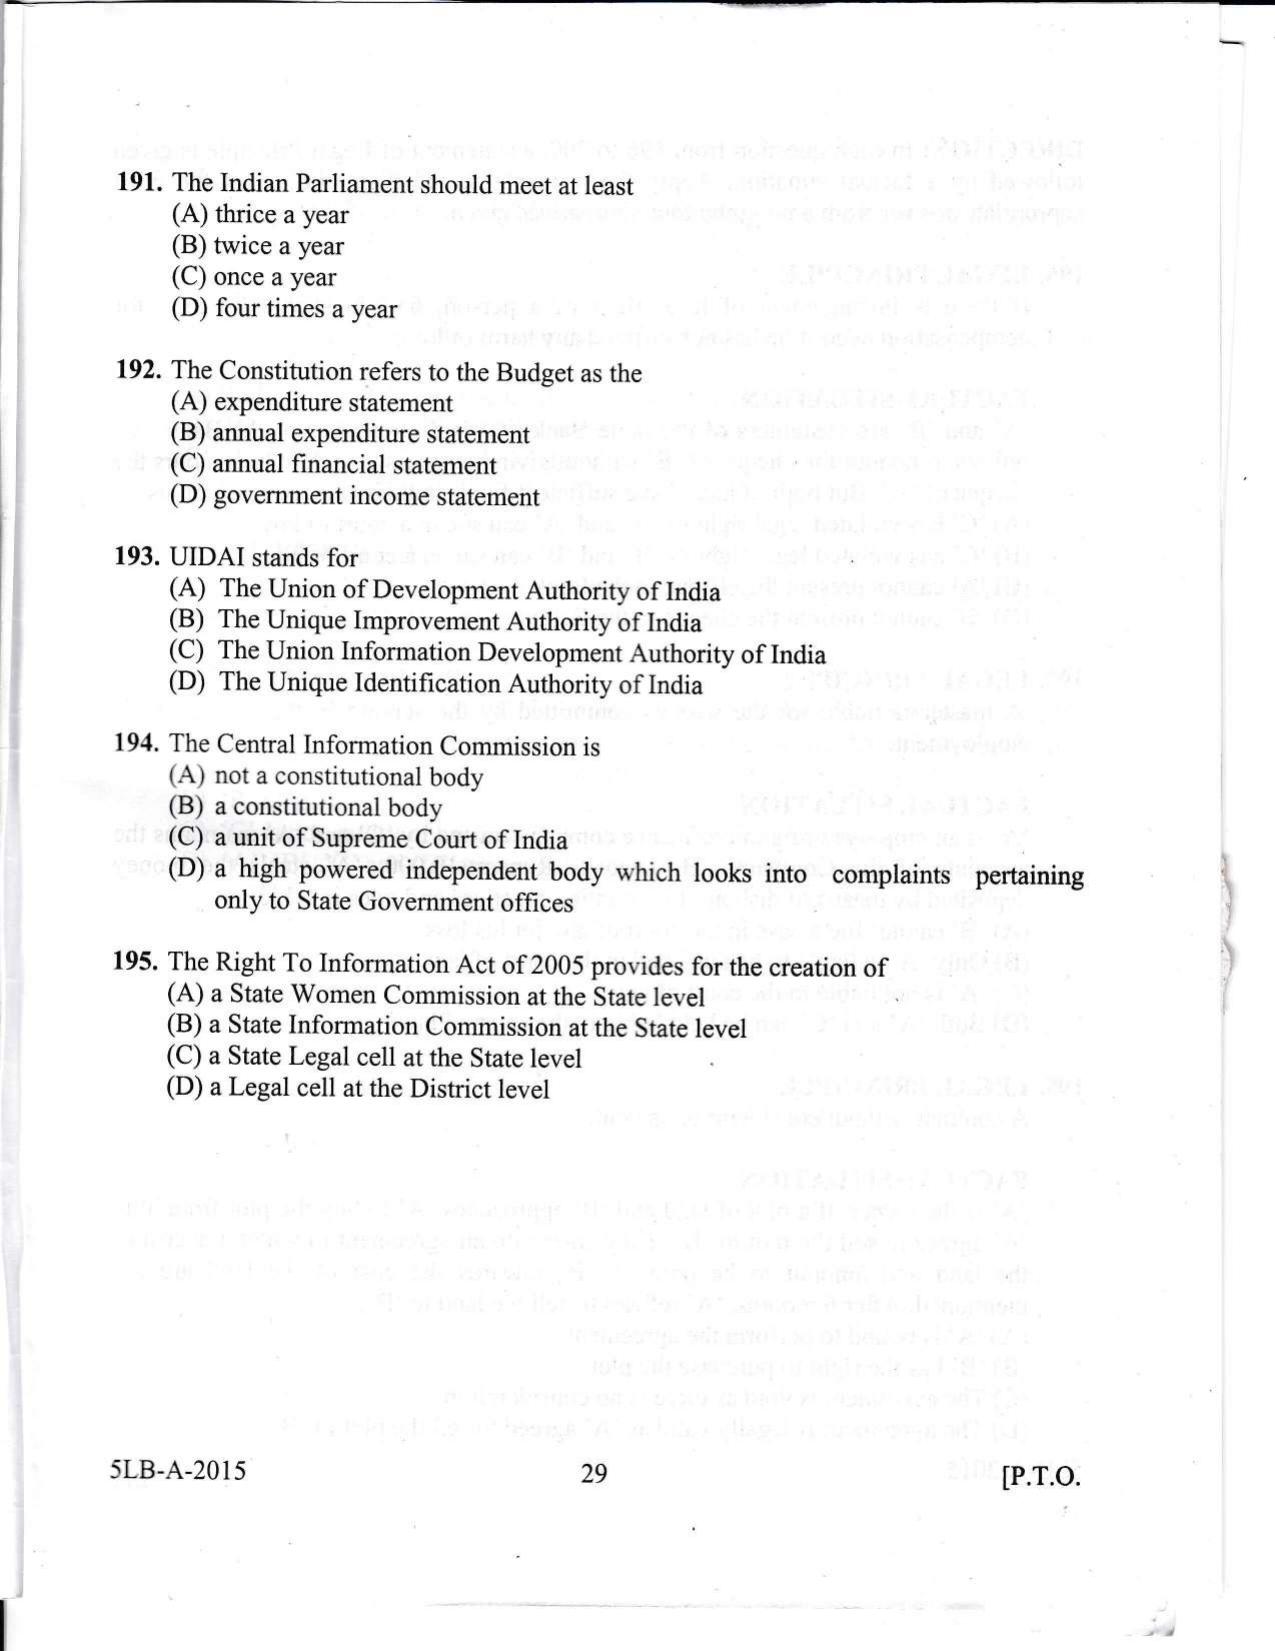 KLEE 5 Year LLB Exam 2015 Question Paper - Page 29